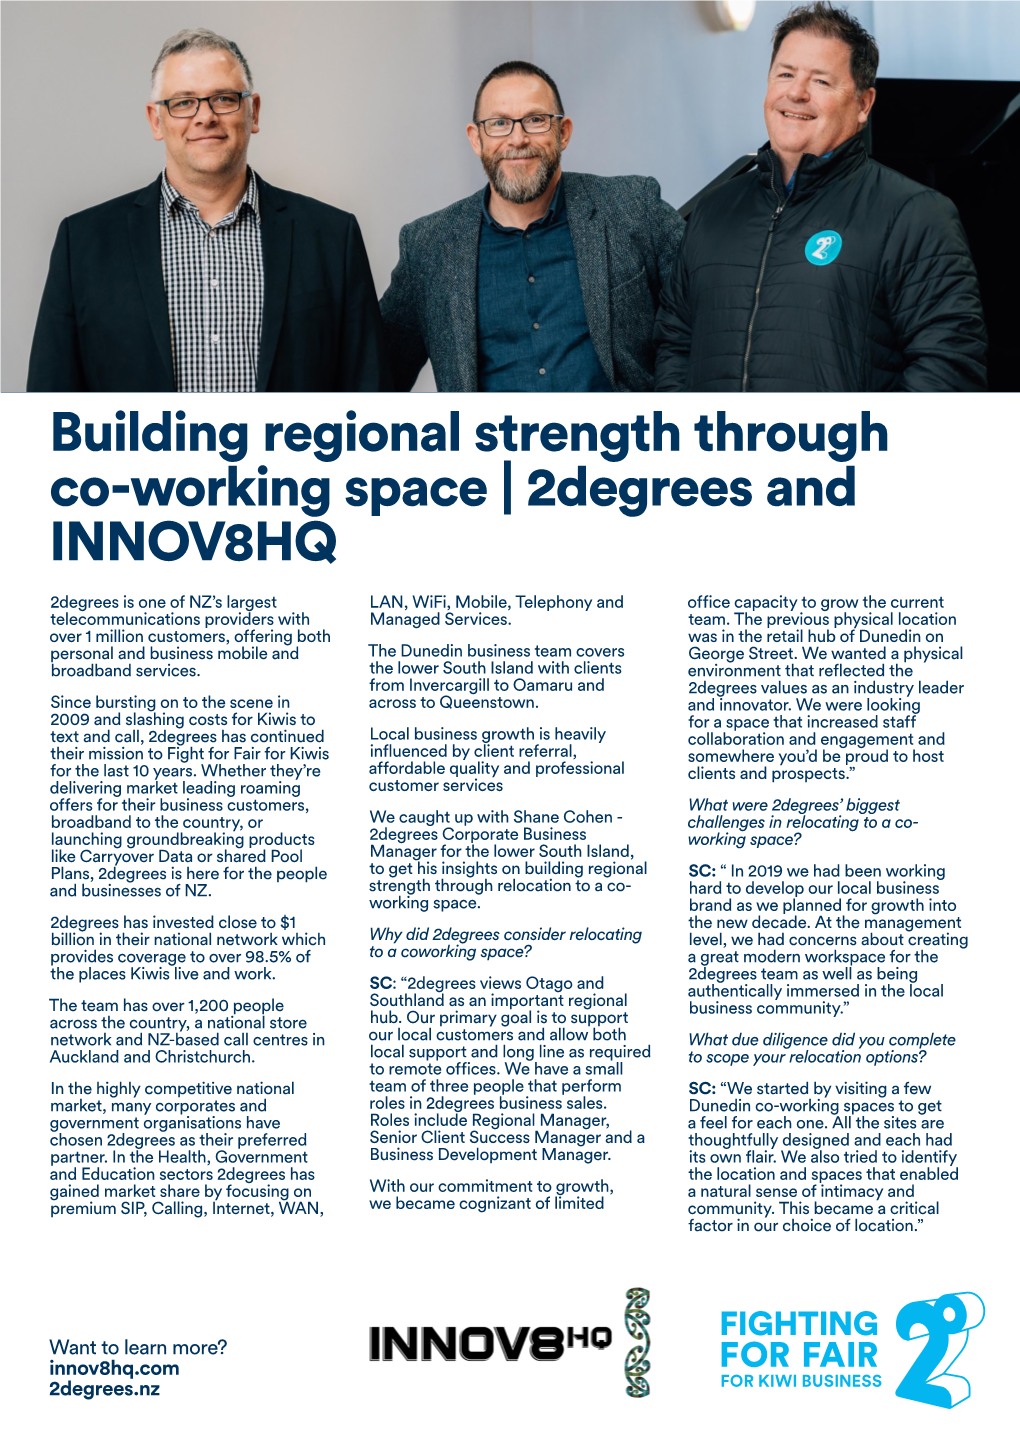 Building Regional Strength Through Co-Working Space | 2Degrees and INNOV8HQ